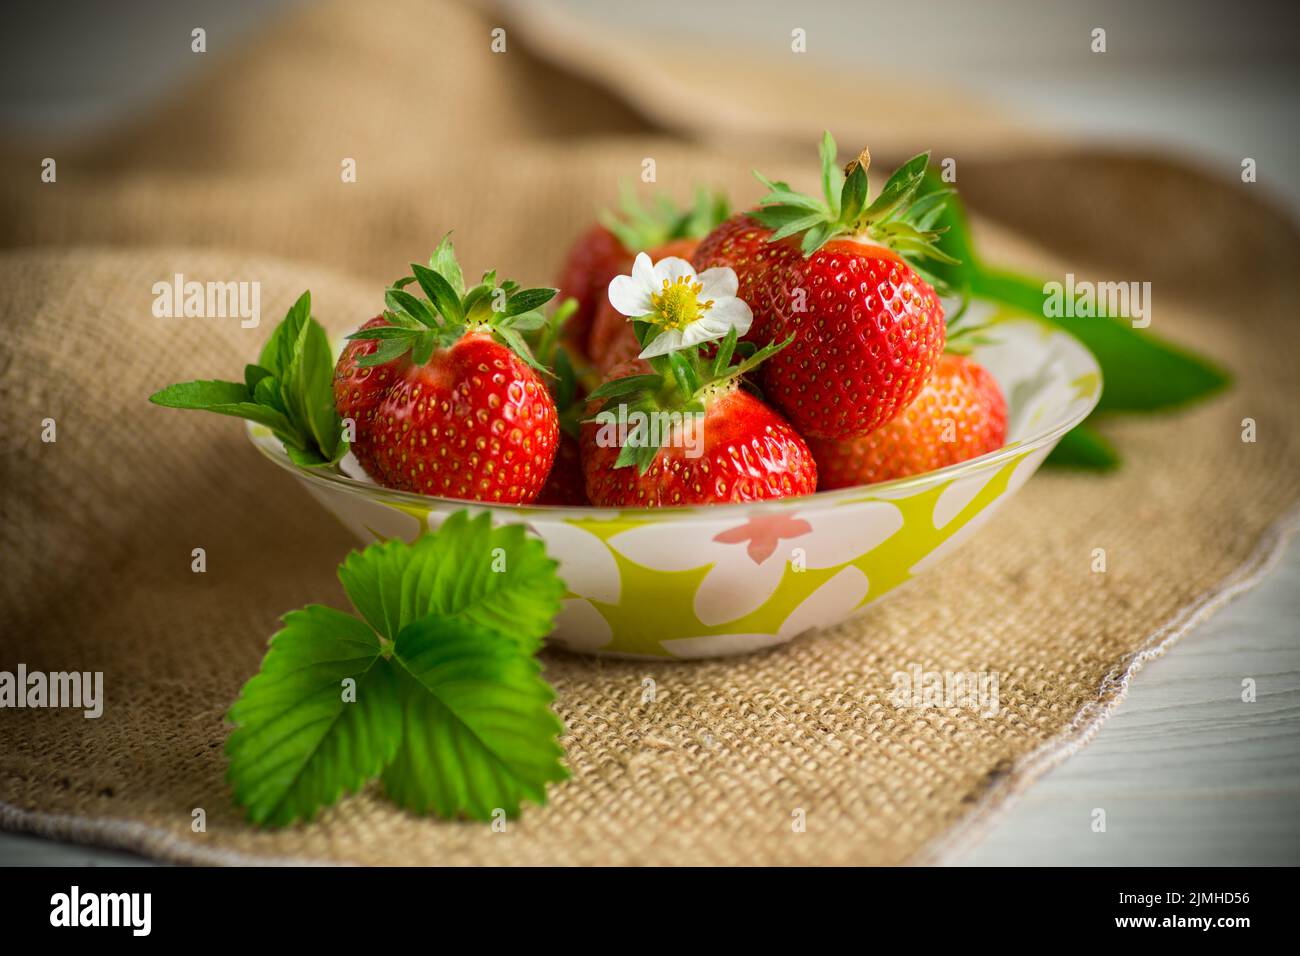 ripe red strawberries in a bowl on a burlap tablecloth, on a wooden table Stock Photo